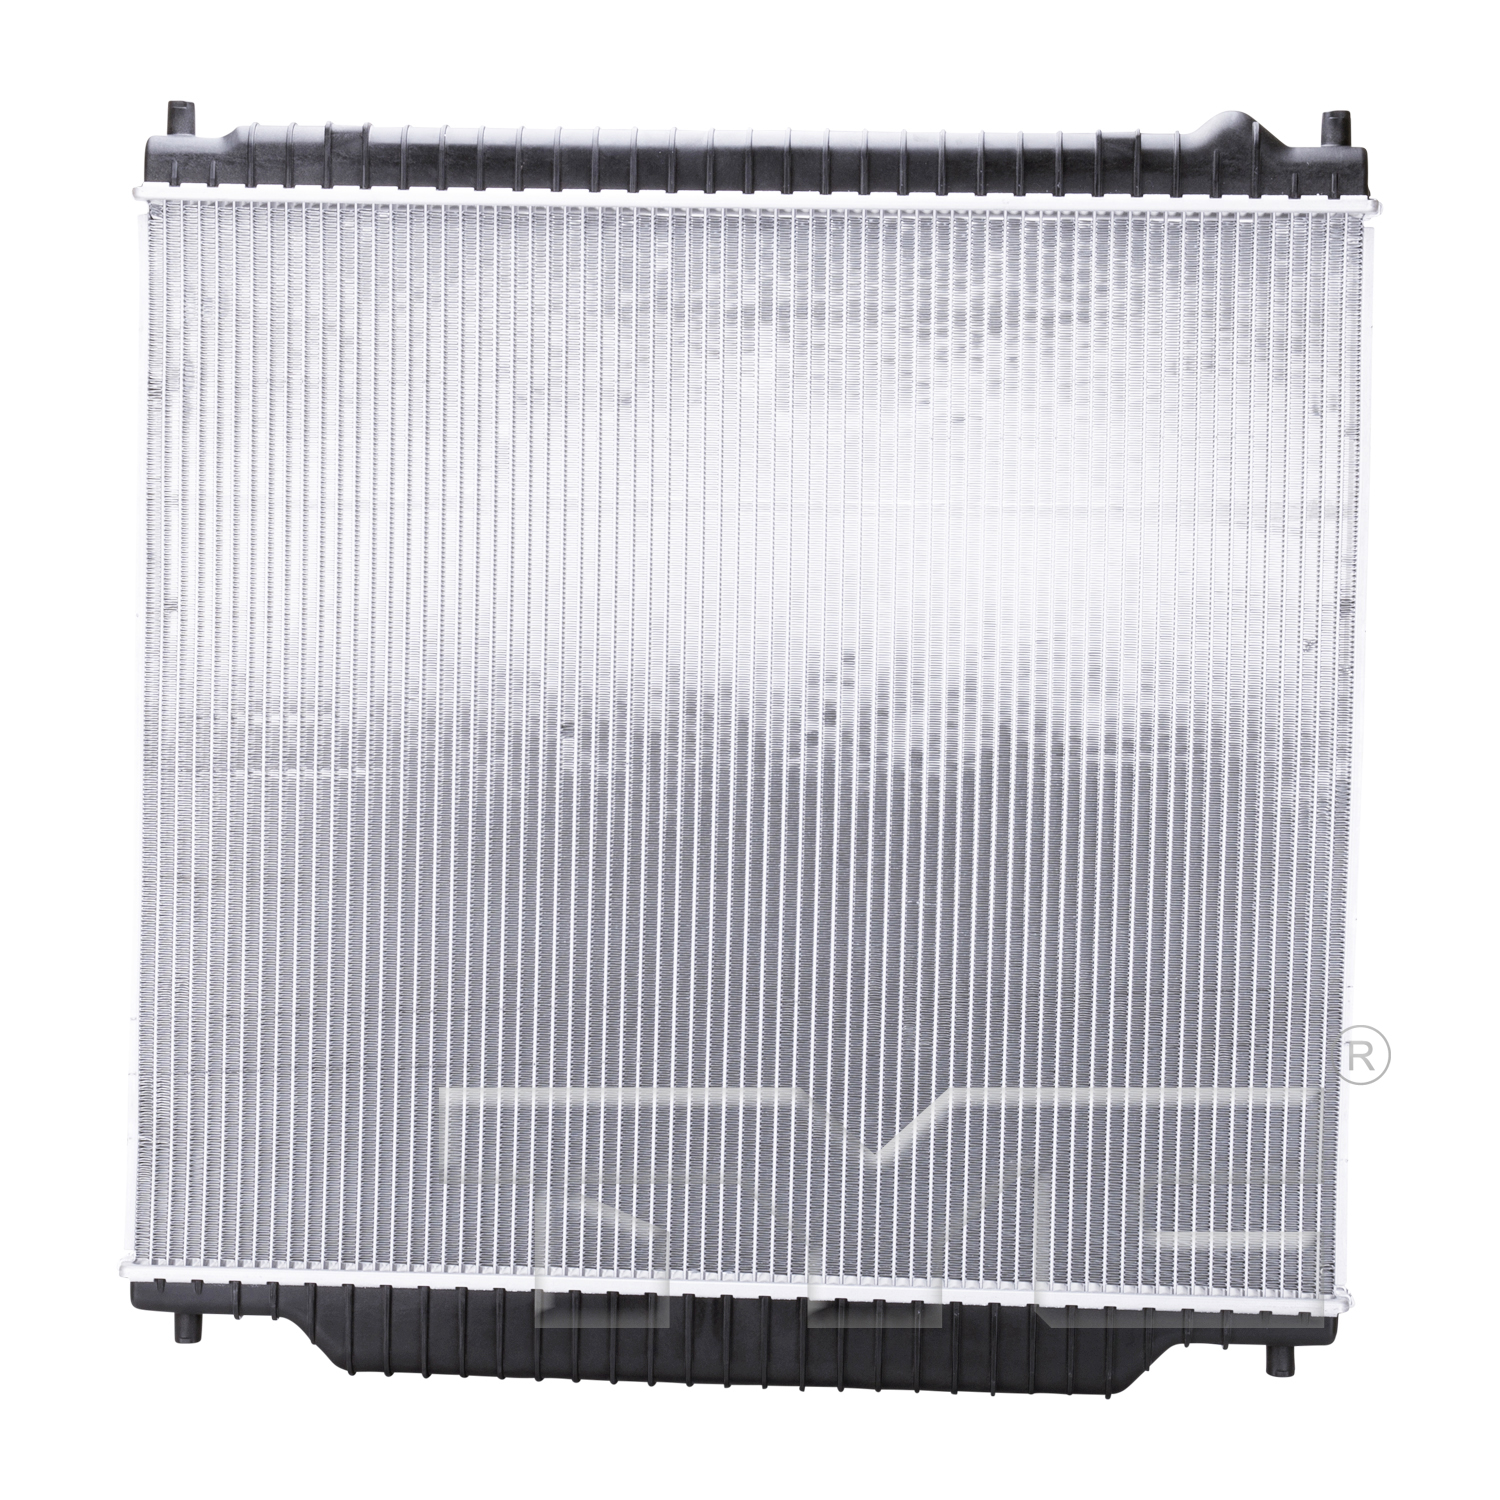 Aftermarket RADIATORS for FORD - F-250 SUPER DUTY, F-250 SUPER DUTY,99-04,Radiator assembly